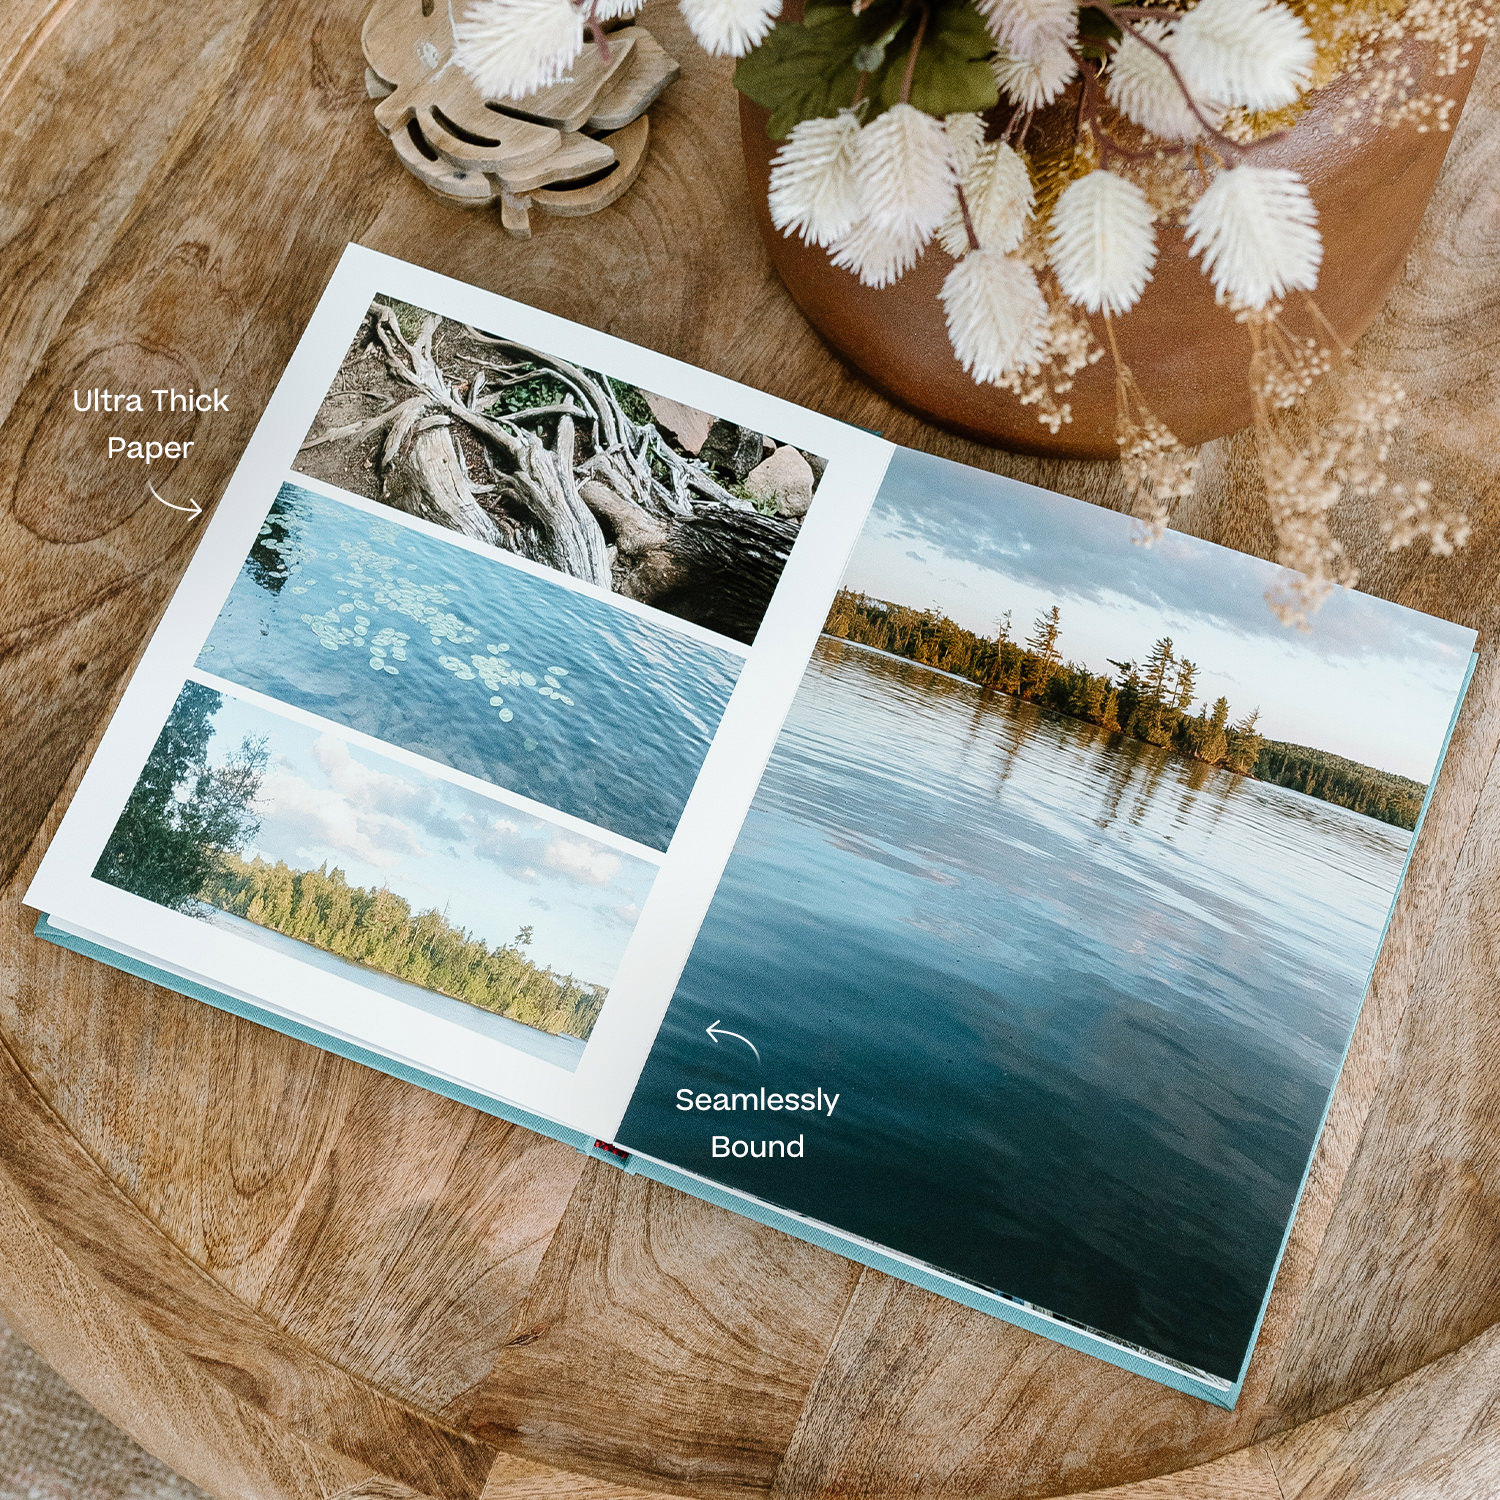 Layflat Photo Album  The best layflat photo book you can make on